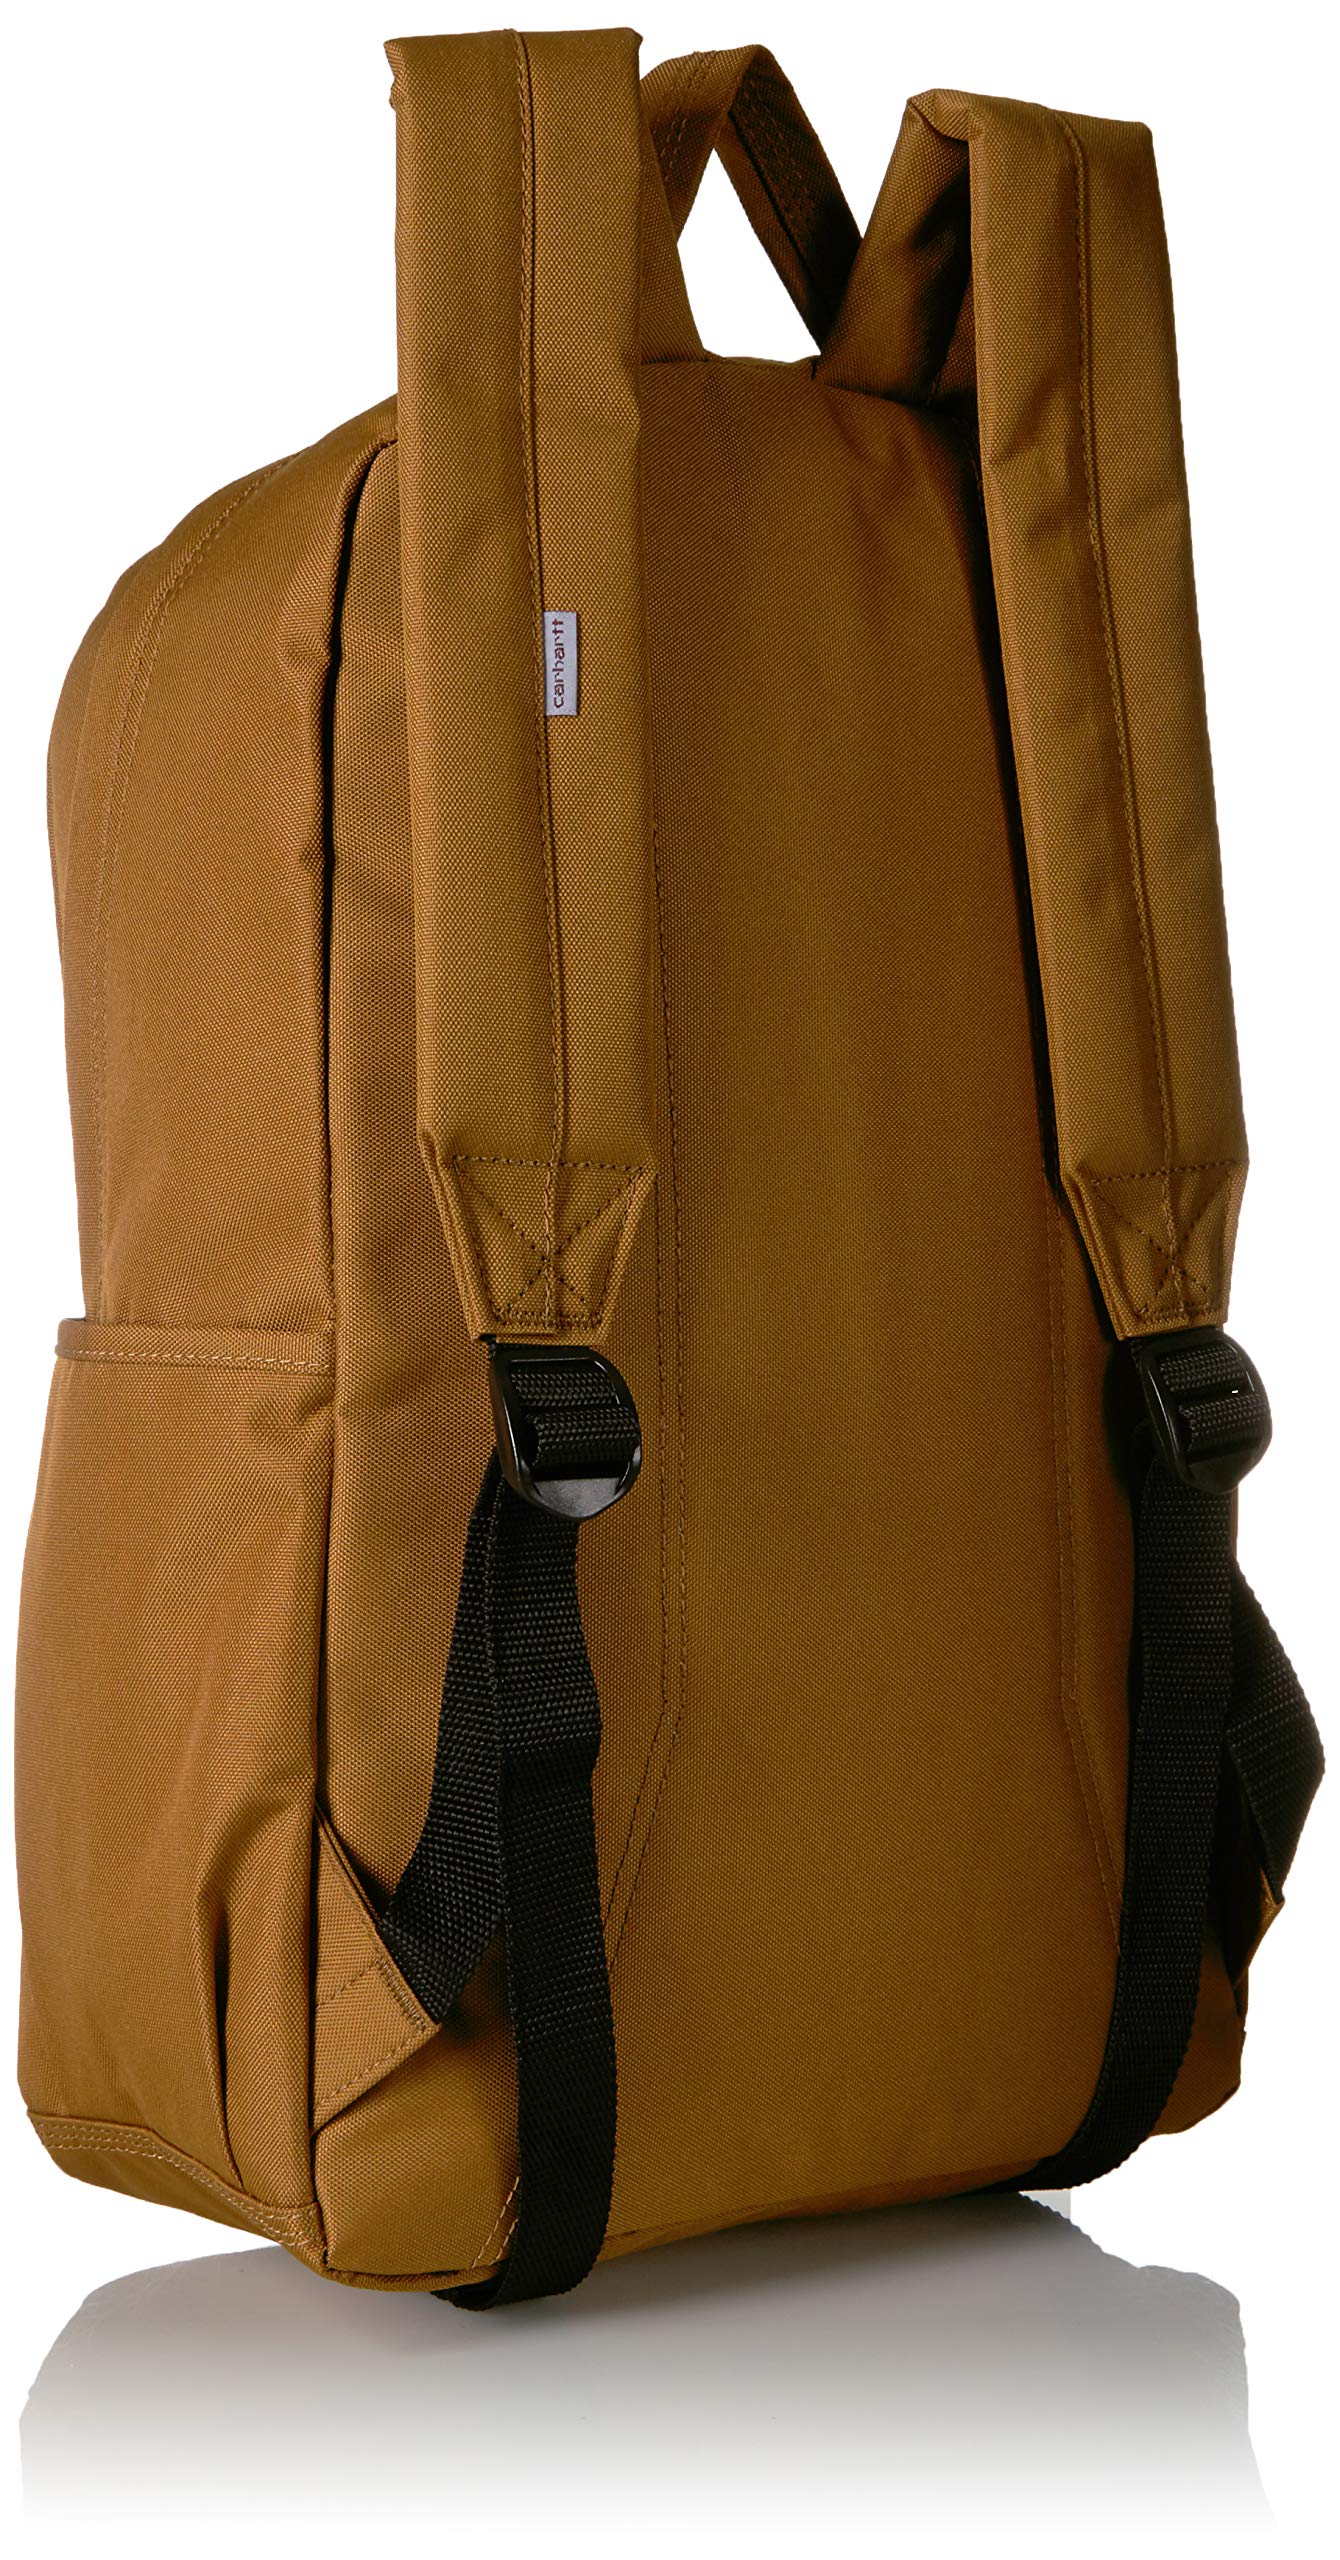 Carhartt Trade Plus Backpack with 15-Inch Laptop Compartment, Carhartt Brown